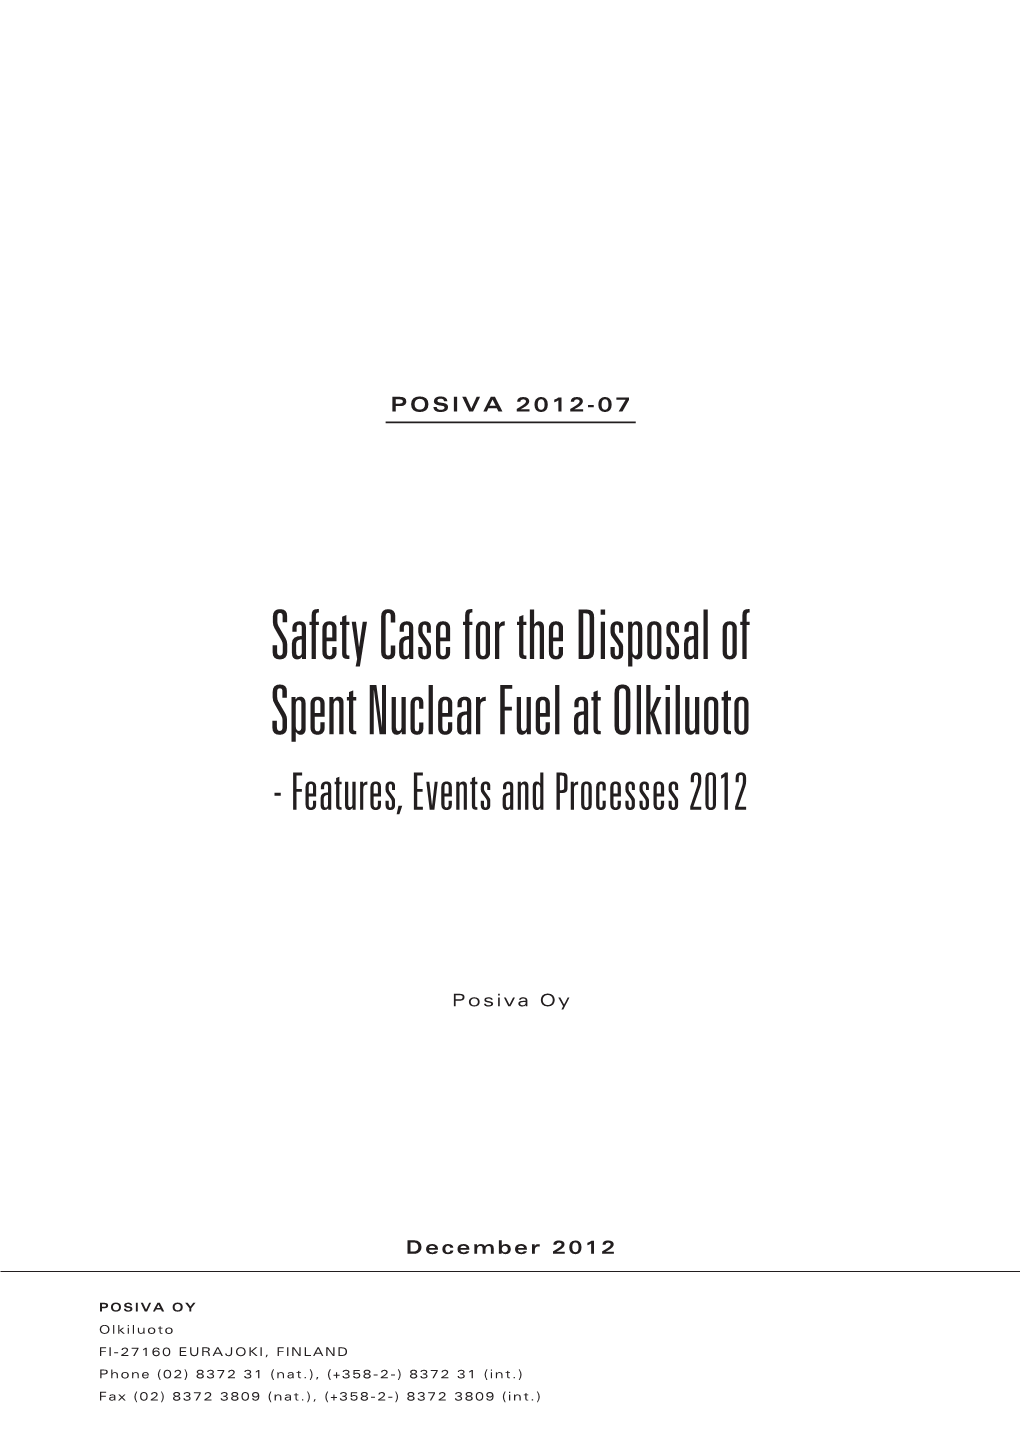 Safety Case for the Disposal of Spent Nuclear Fuel at Olkiluoto - Features, Events and Processes 2012